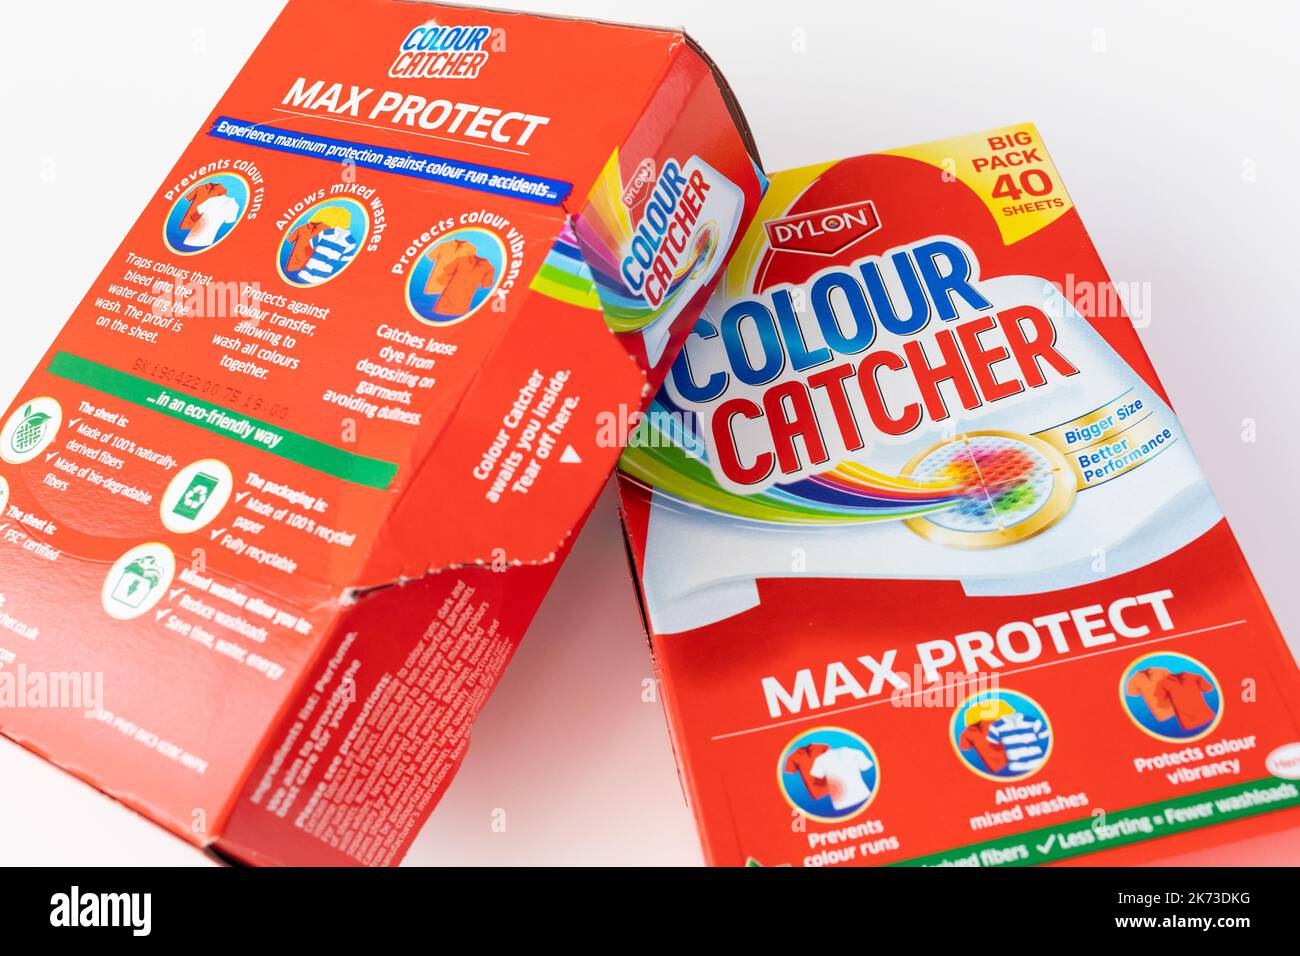 https://c8.alamy.com/comp/2K73DKG/two-boxes-of-dylon-colour-catcher-sheets-for-protection-against-colour-runs-in-the-washing-machine-2K73DKG.jpg